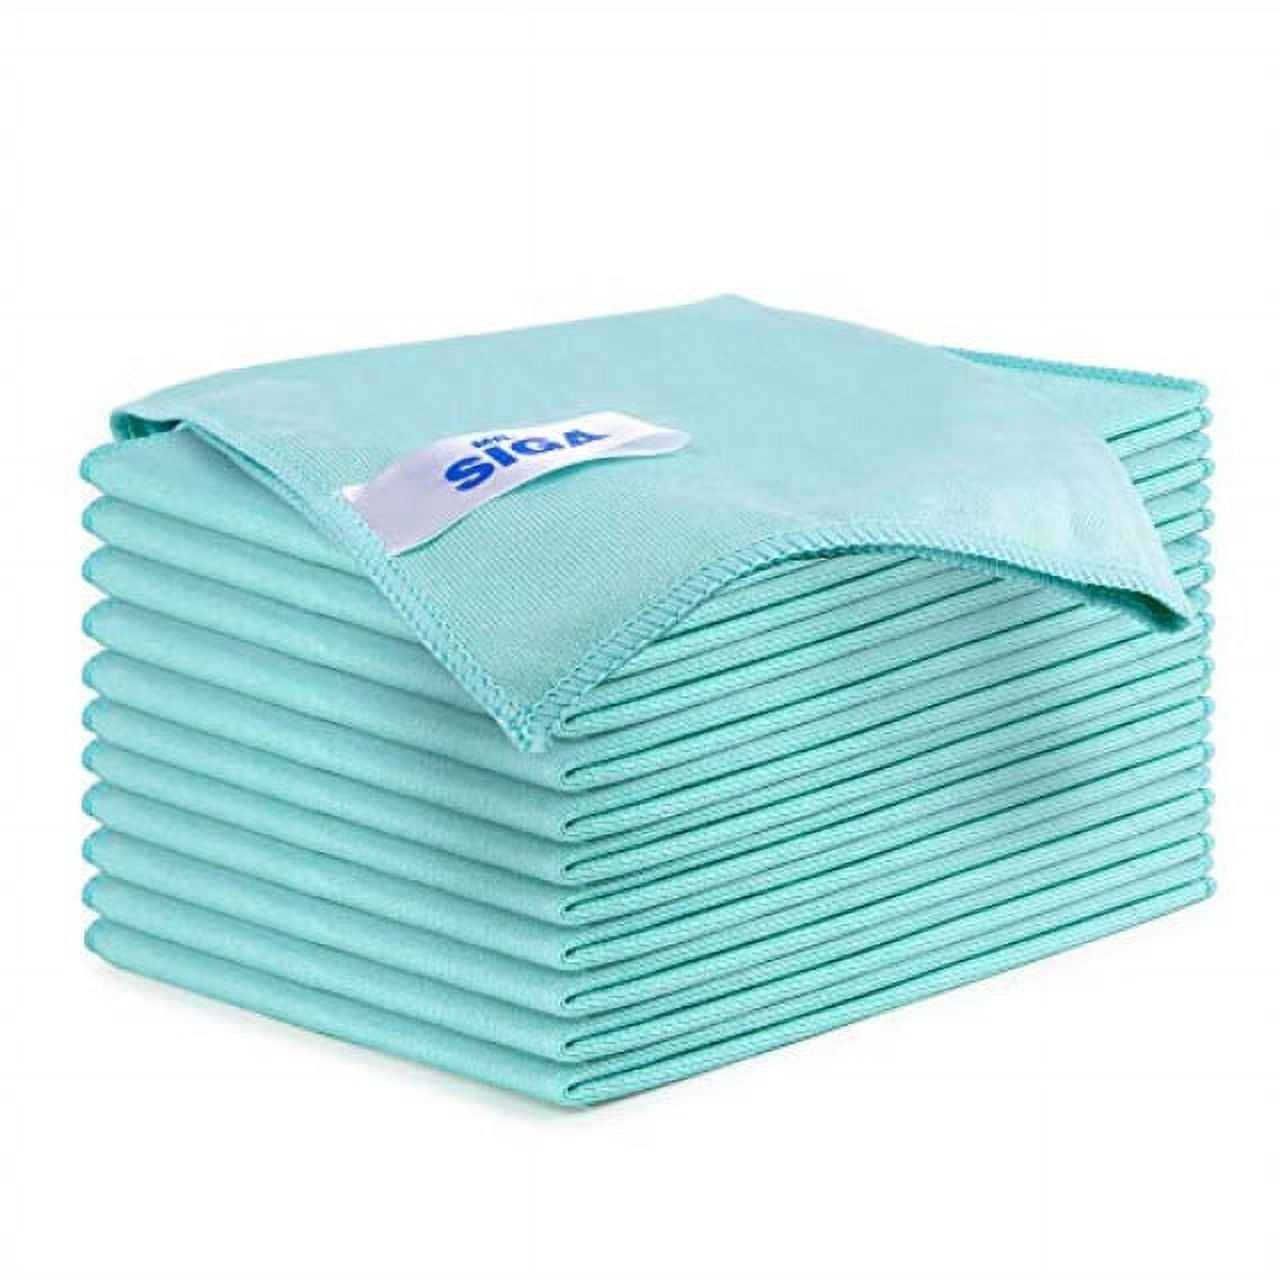 Microfiber Rags in A Box (20 Count) - Mwipes - 8.7x8.7 Reusable